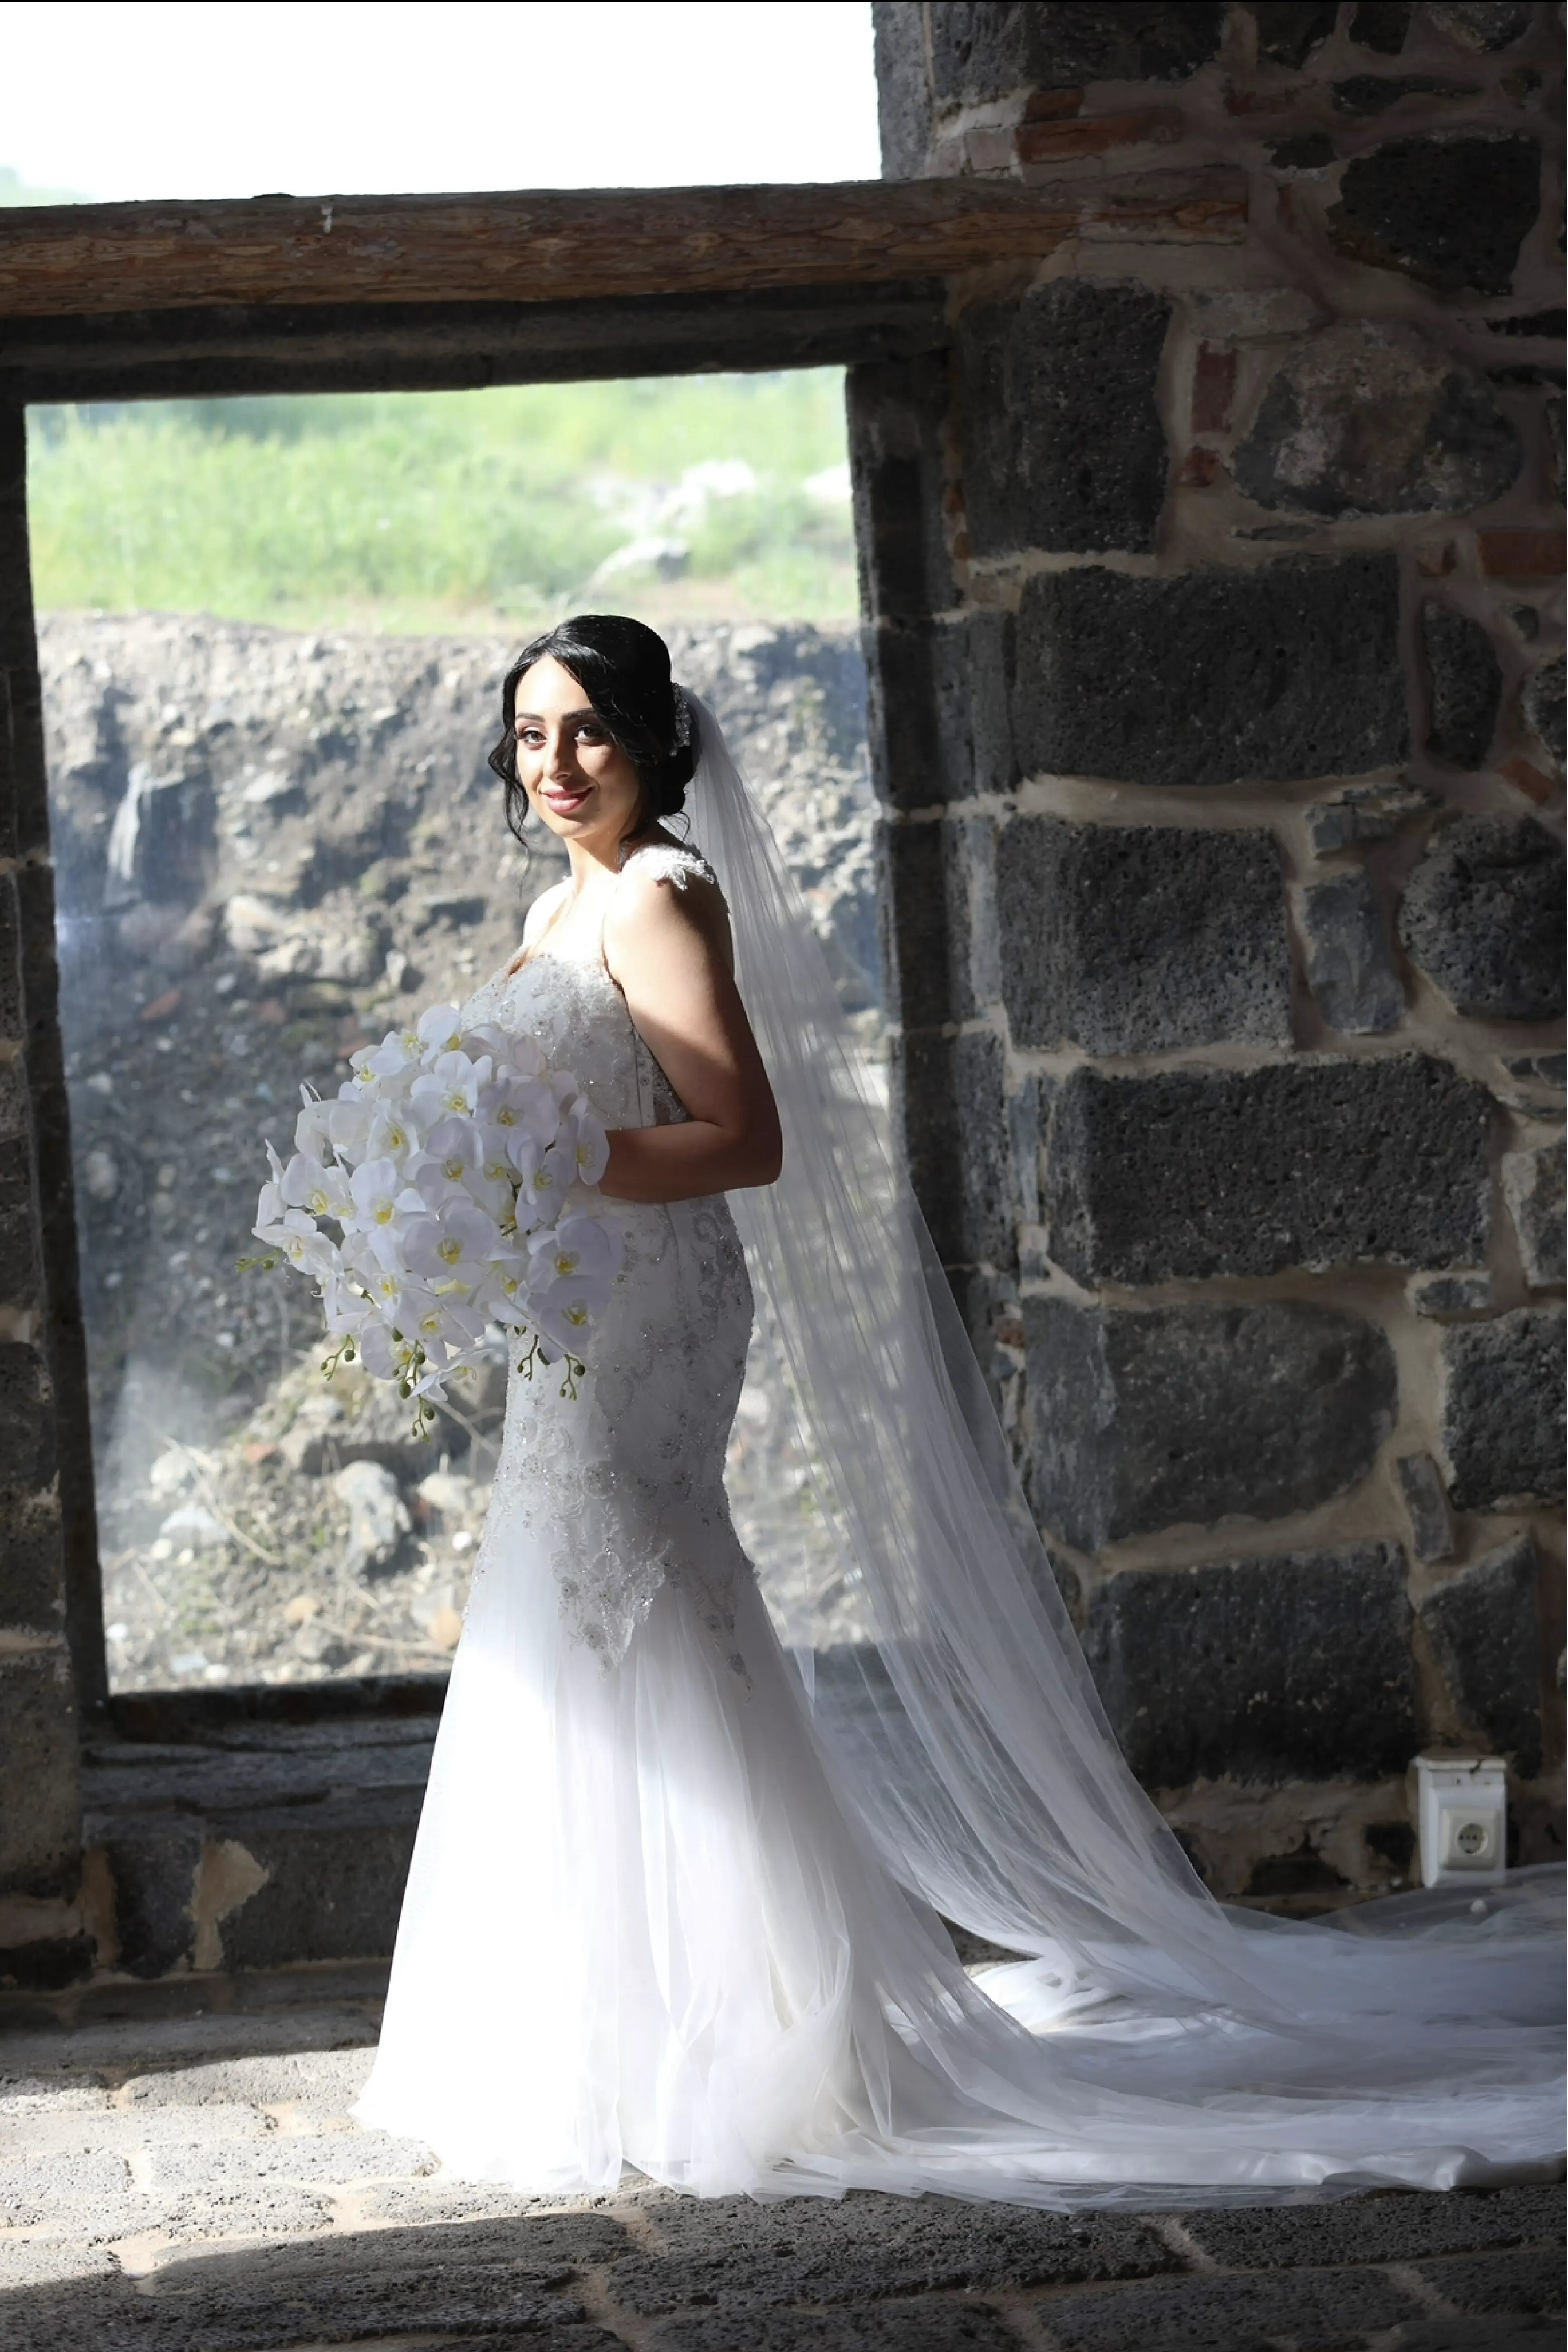 A bride in a lace wedding dress with a flowing headpiece, standing on a stone floor with her dress trailing behind her. She holds a bouquet of white flowers.